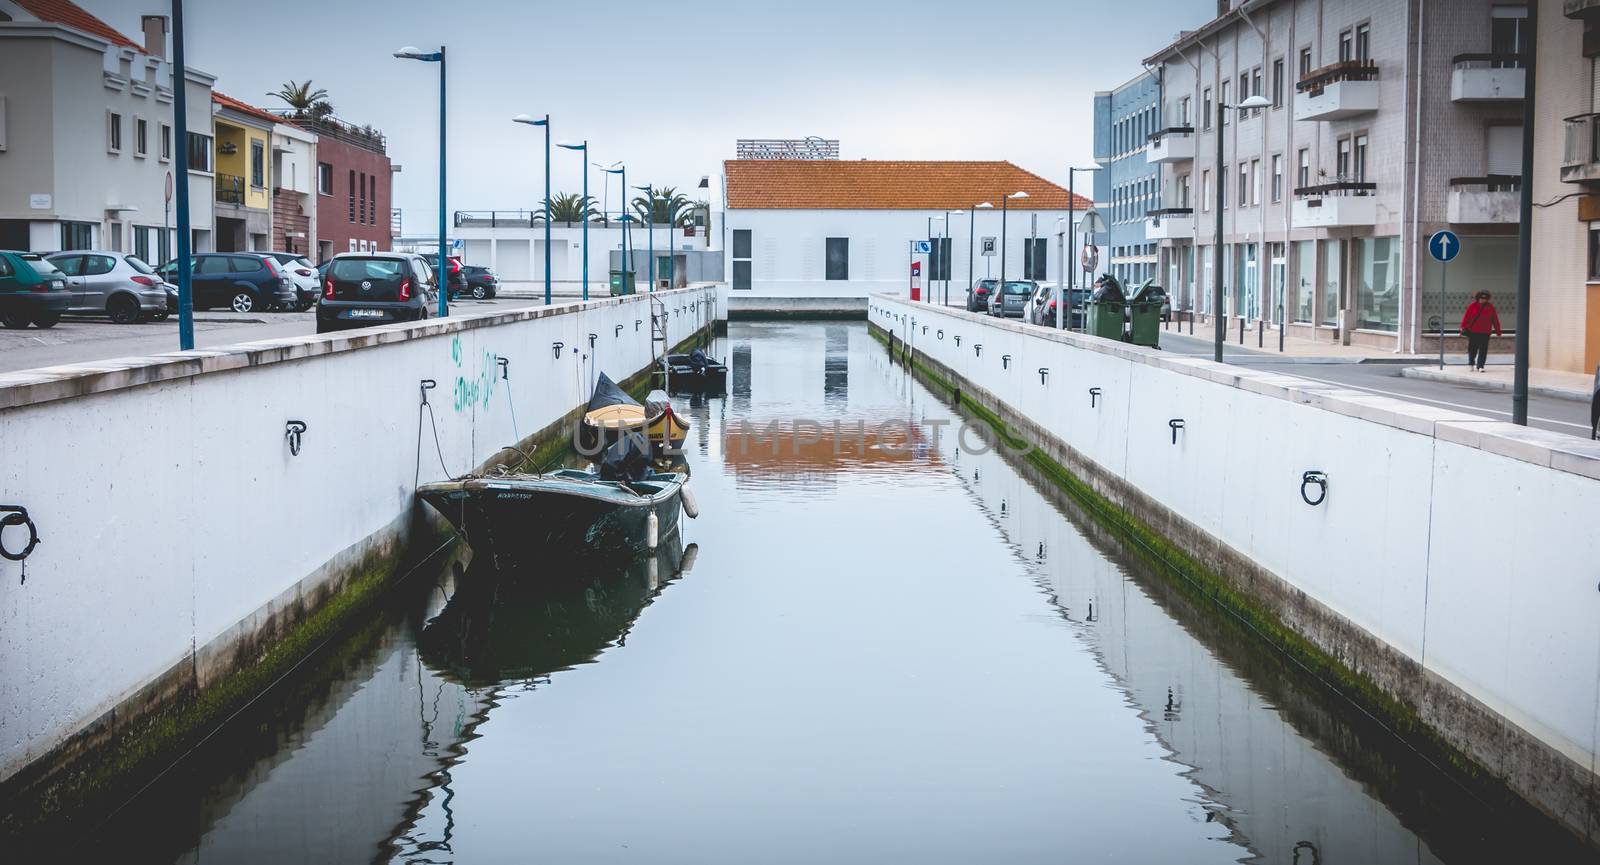 Aveiro, Portugal - May 7, 2018: Small boat docked on a canal in the city on a spring day